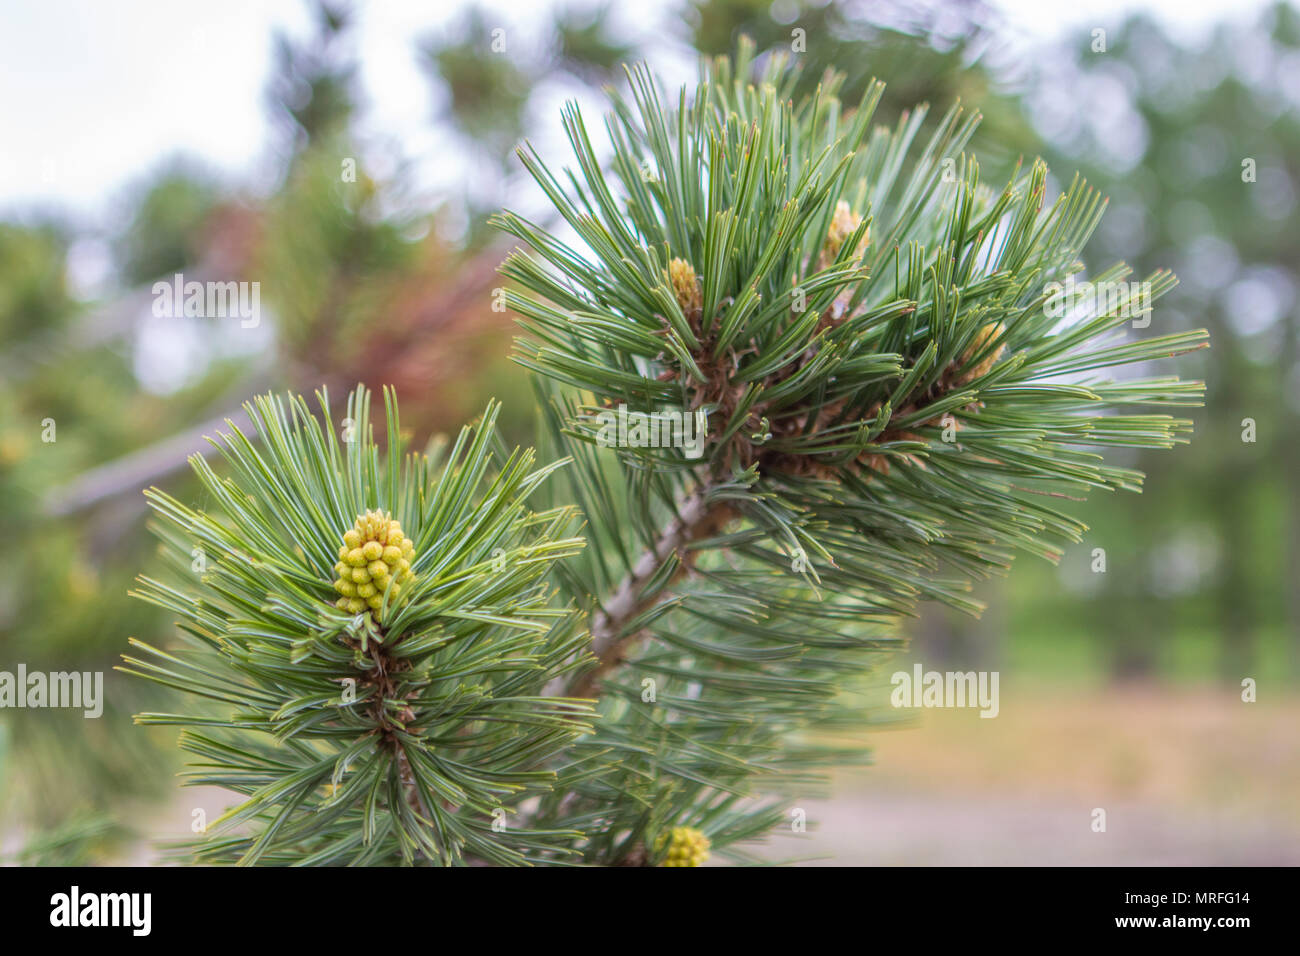 lump on the branches of the Christmas tree Stock Photo